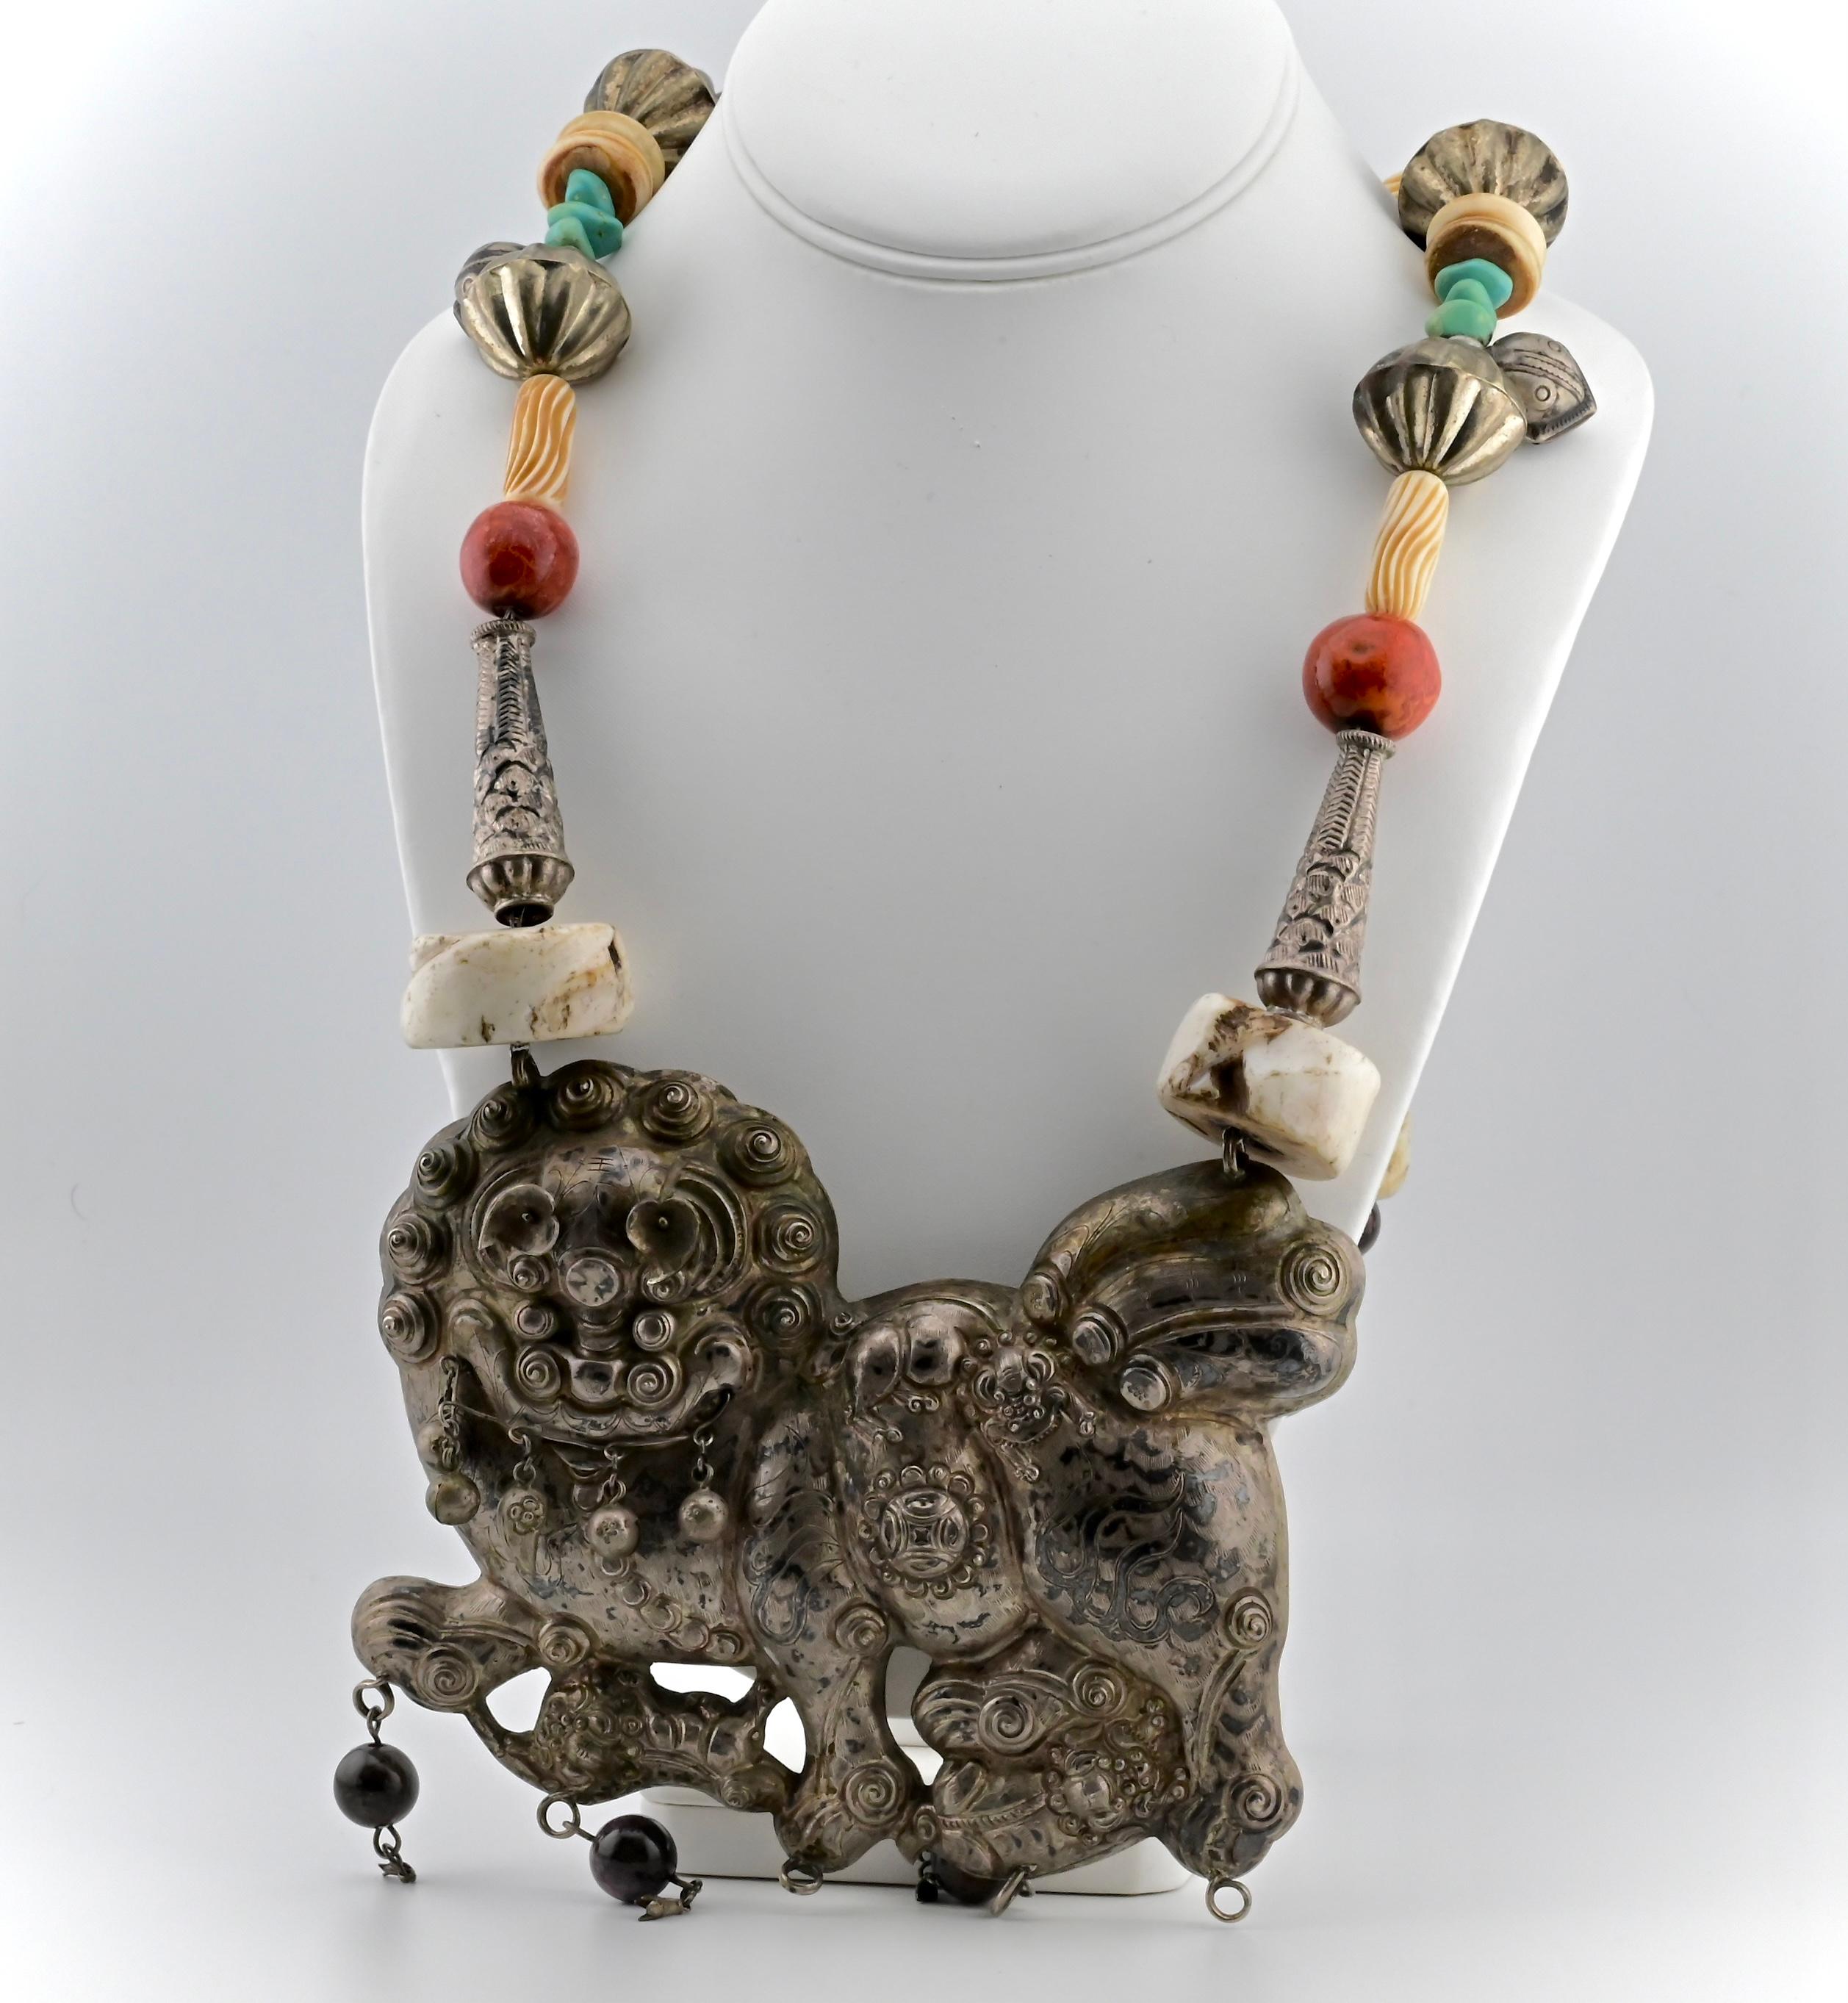 This is a unique Chinese foo lion silver tribal necklace. The necklace has a range of different materials including bone, coral, silver, turquoise, etc.  It weighs a total of 482 grams, and is 22 inches long. Each strand connecting to the lion is 17